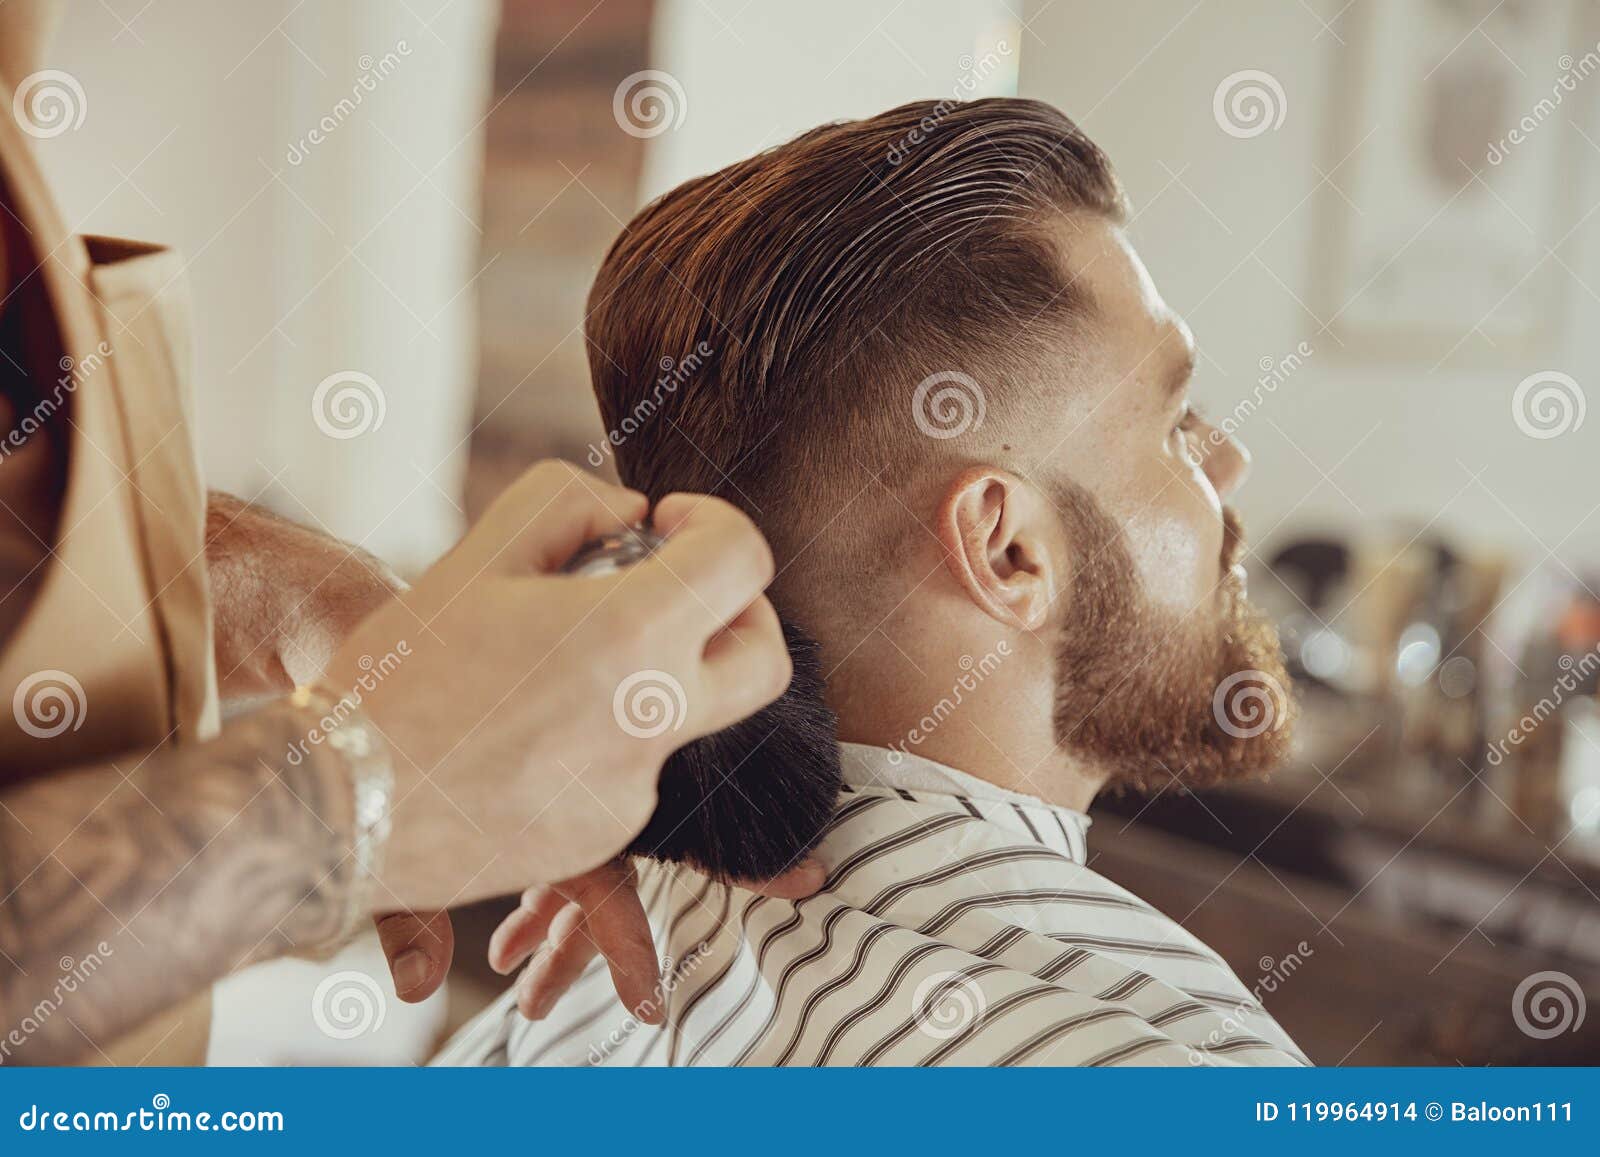 barber shakes hair off from the client`s neck